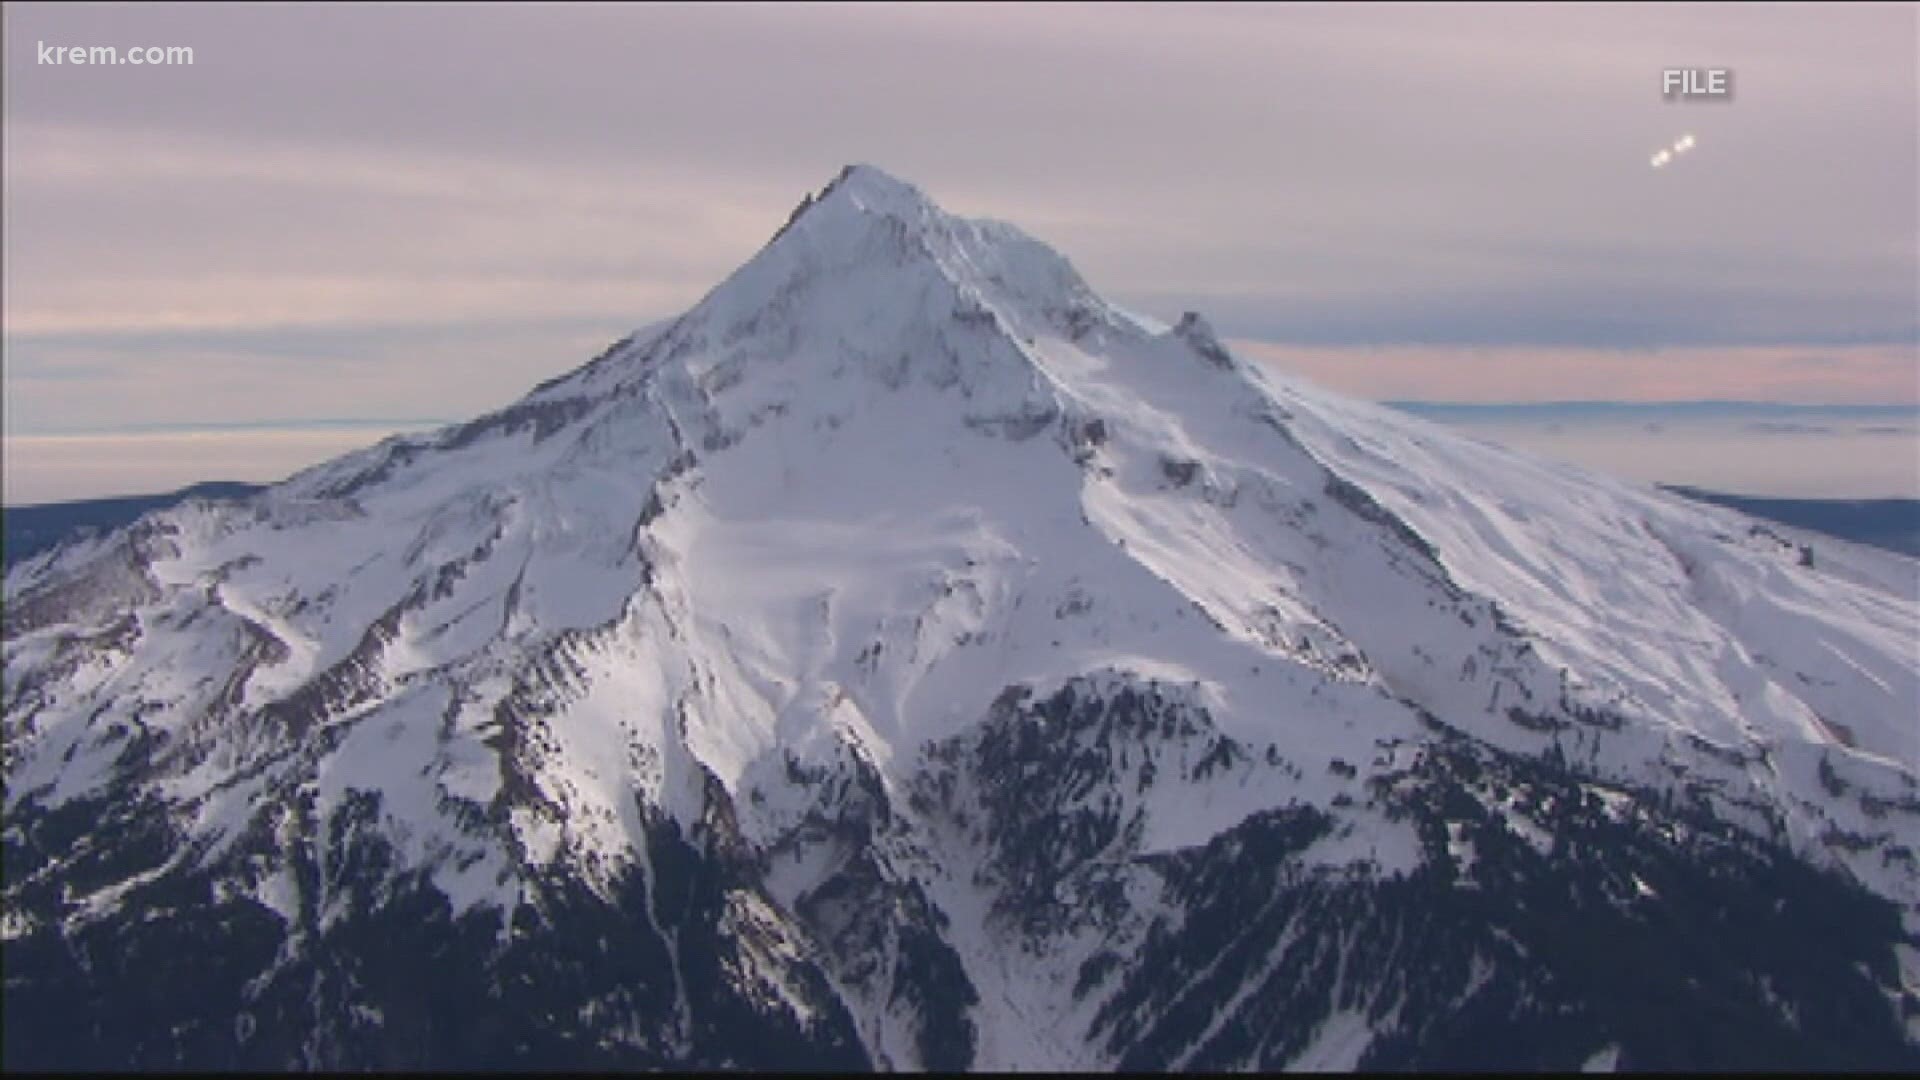 The climber has been identified as 63-year-old Patrick Michael Stretch. He was descending Mt. Hood with his son when he fell.